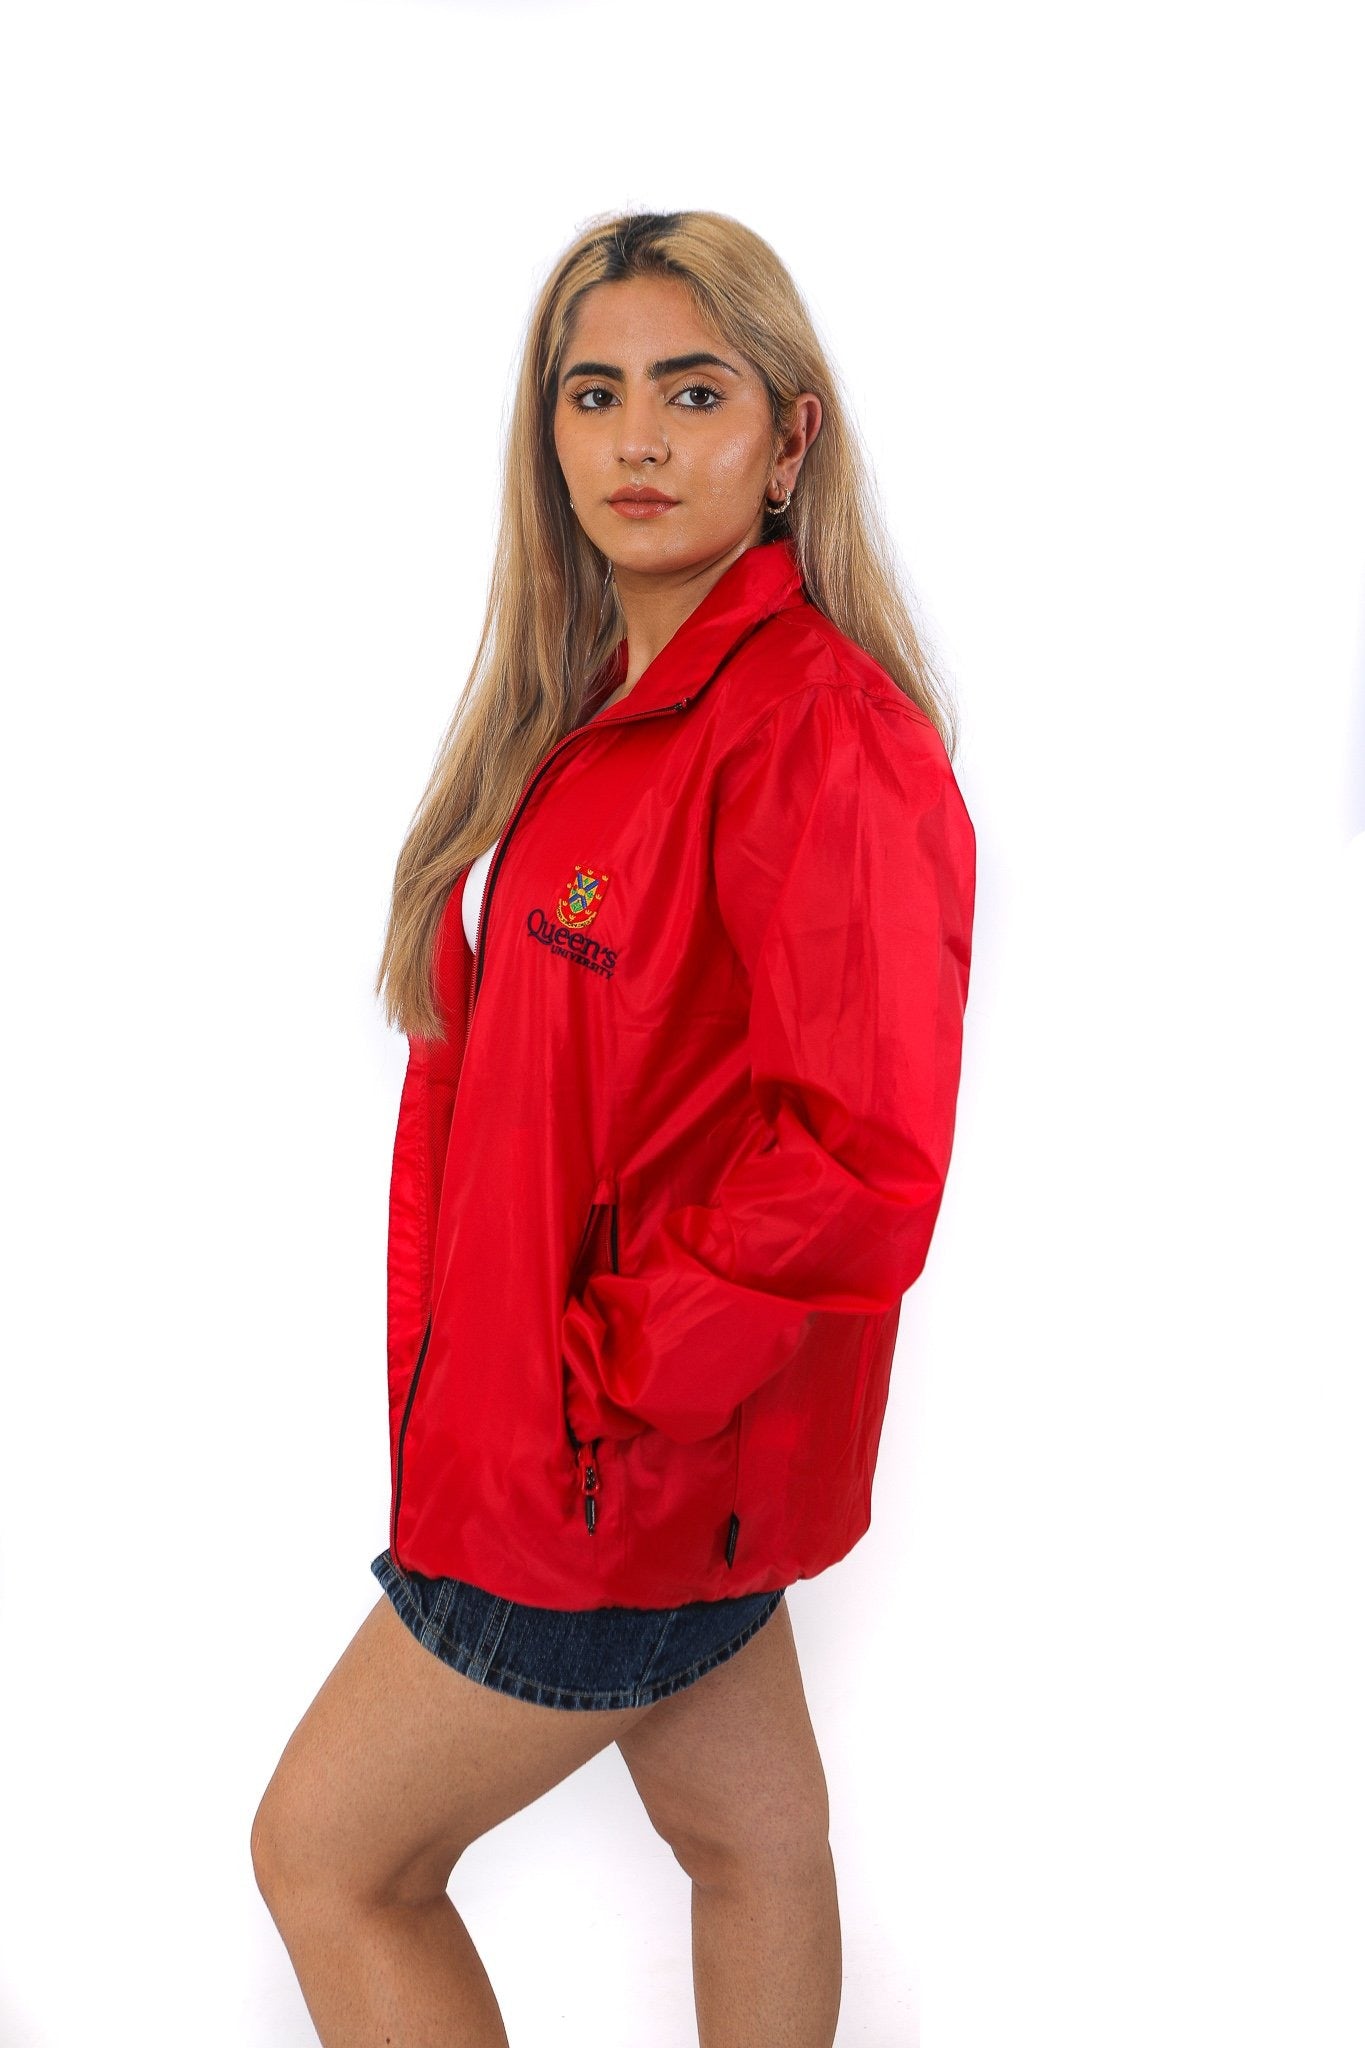 Side of red zip up rain jacket with red Queen's crest logo